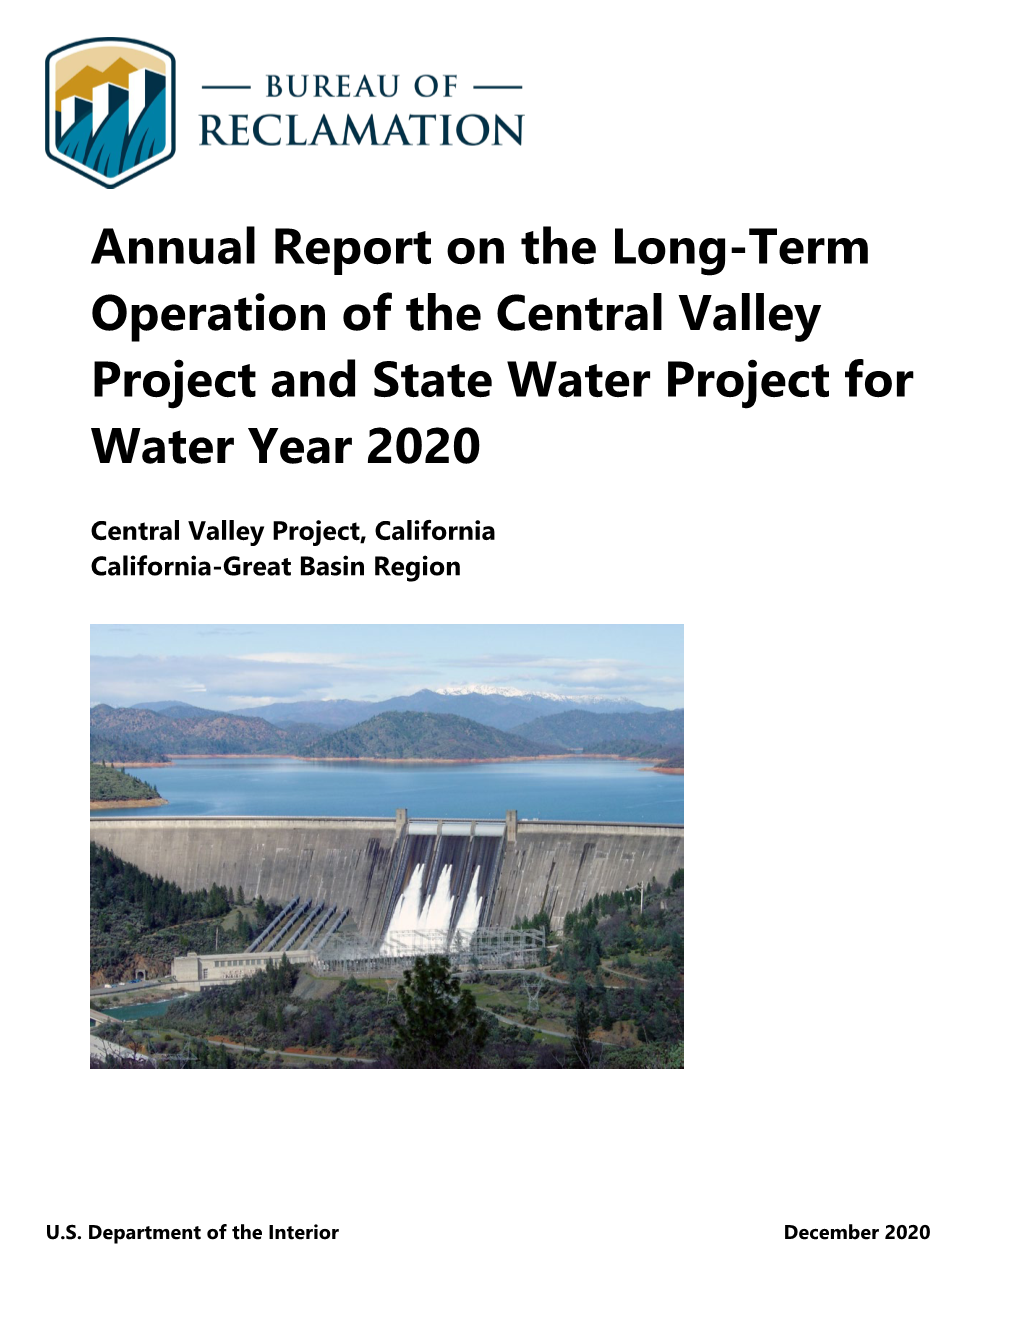 Annual Report on the Long-Term Operation of the Central Valley Project and State Water Project for Water Year 2020